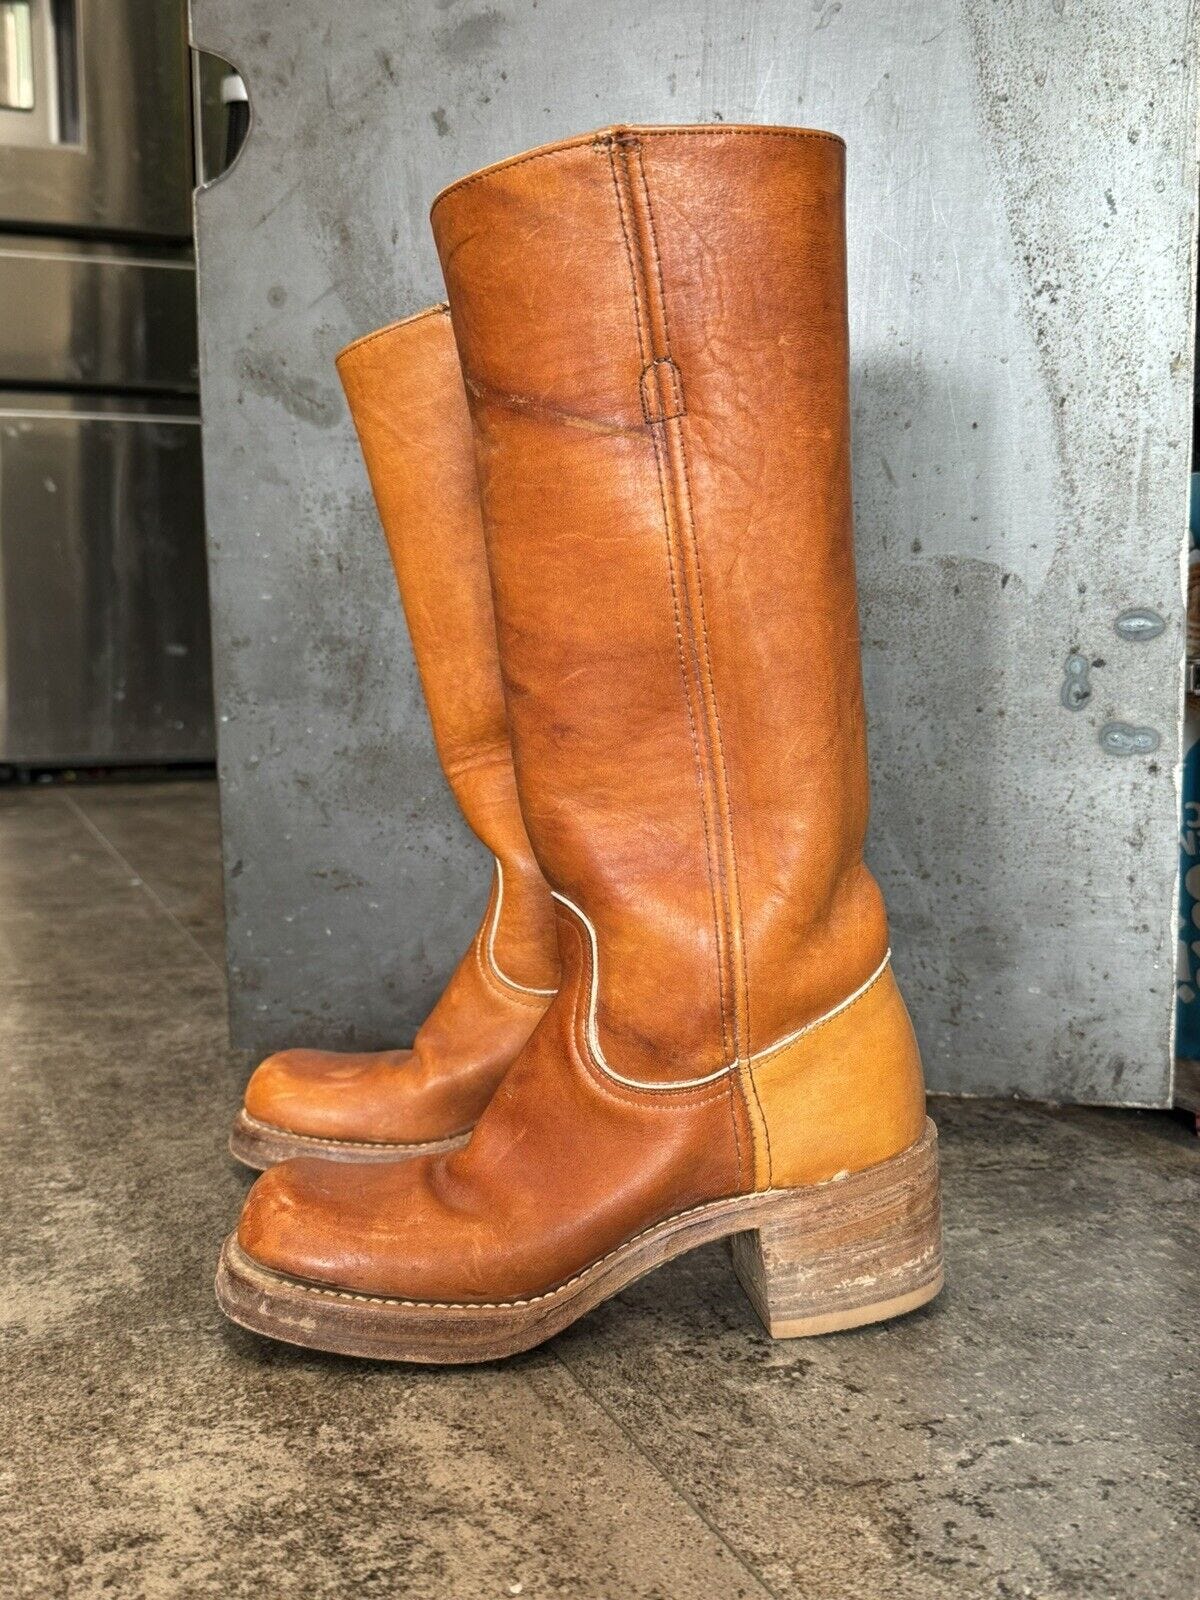 Vintage Frye Black Label USA Campus Boots Chunky Heel 5 Cognac Tan Square Toe 70 - Picture 1 of 12